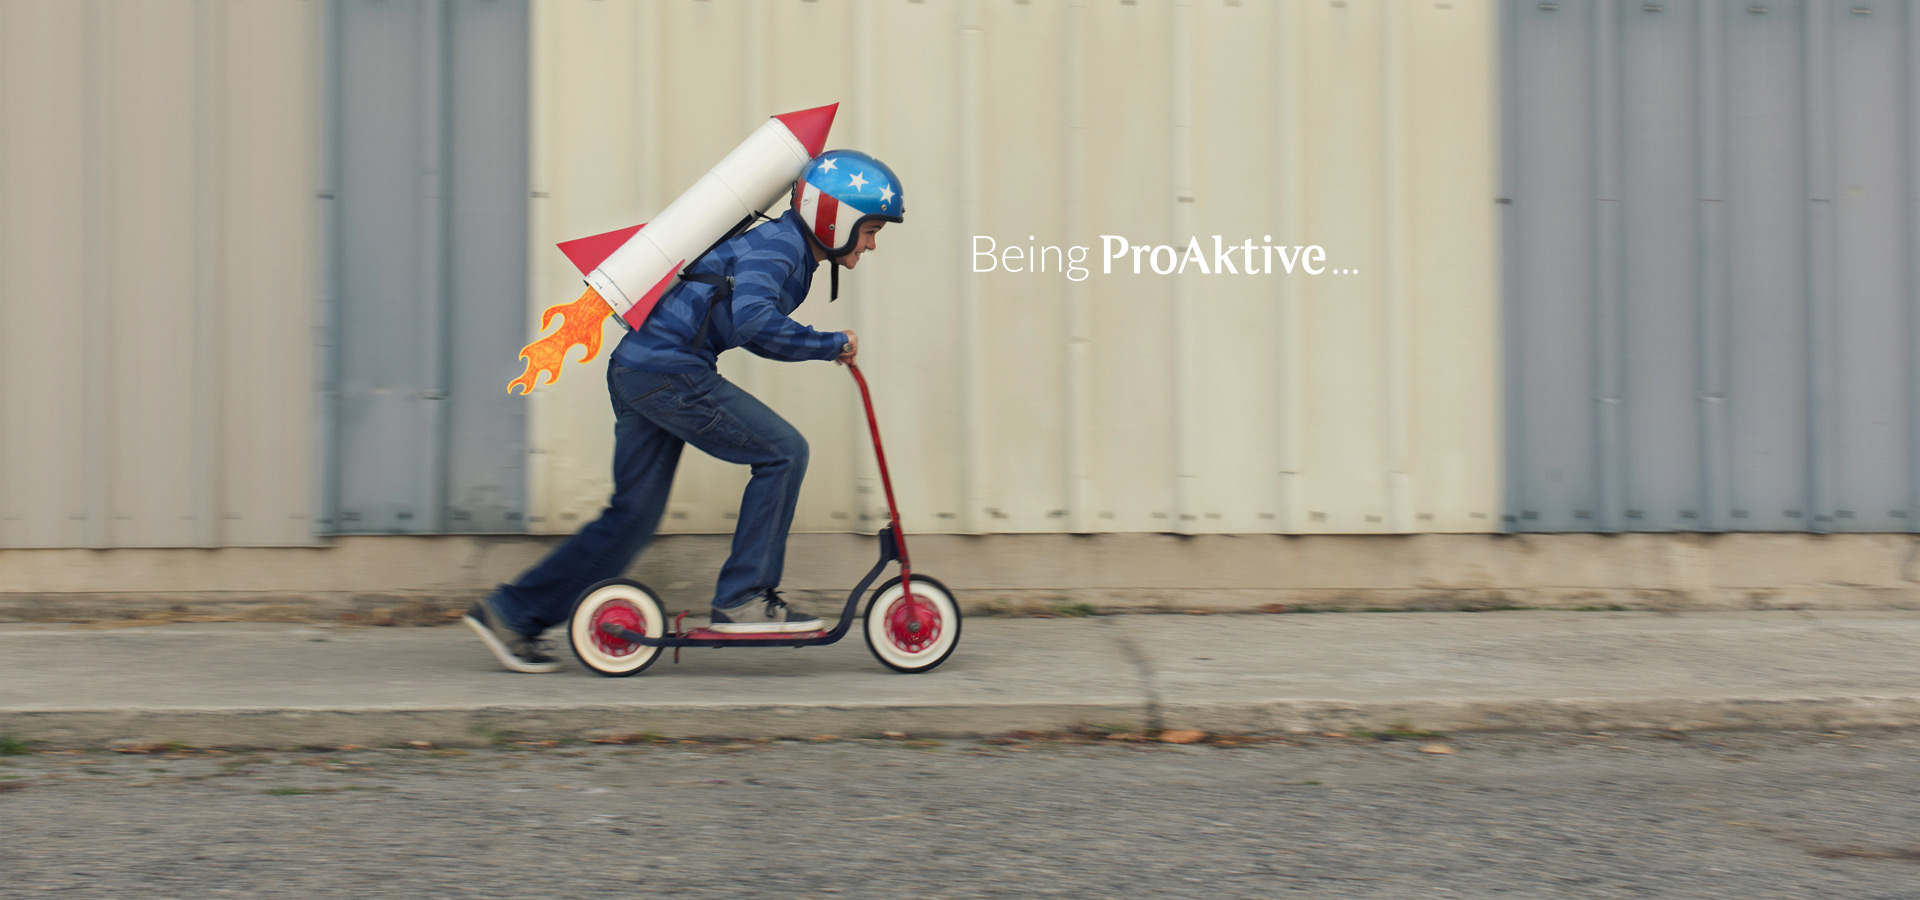 Being ProAktive Means...